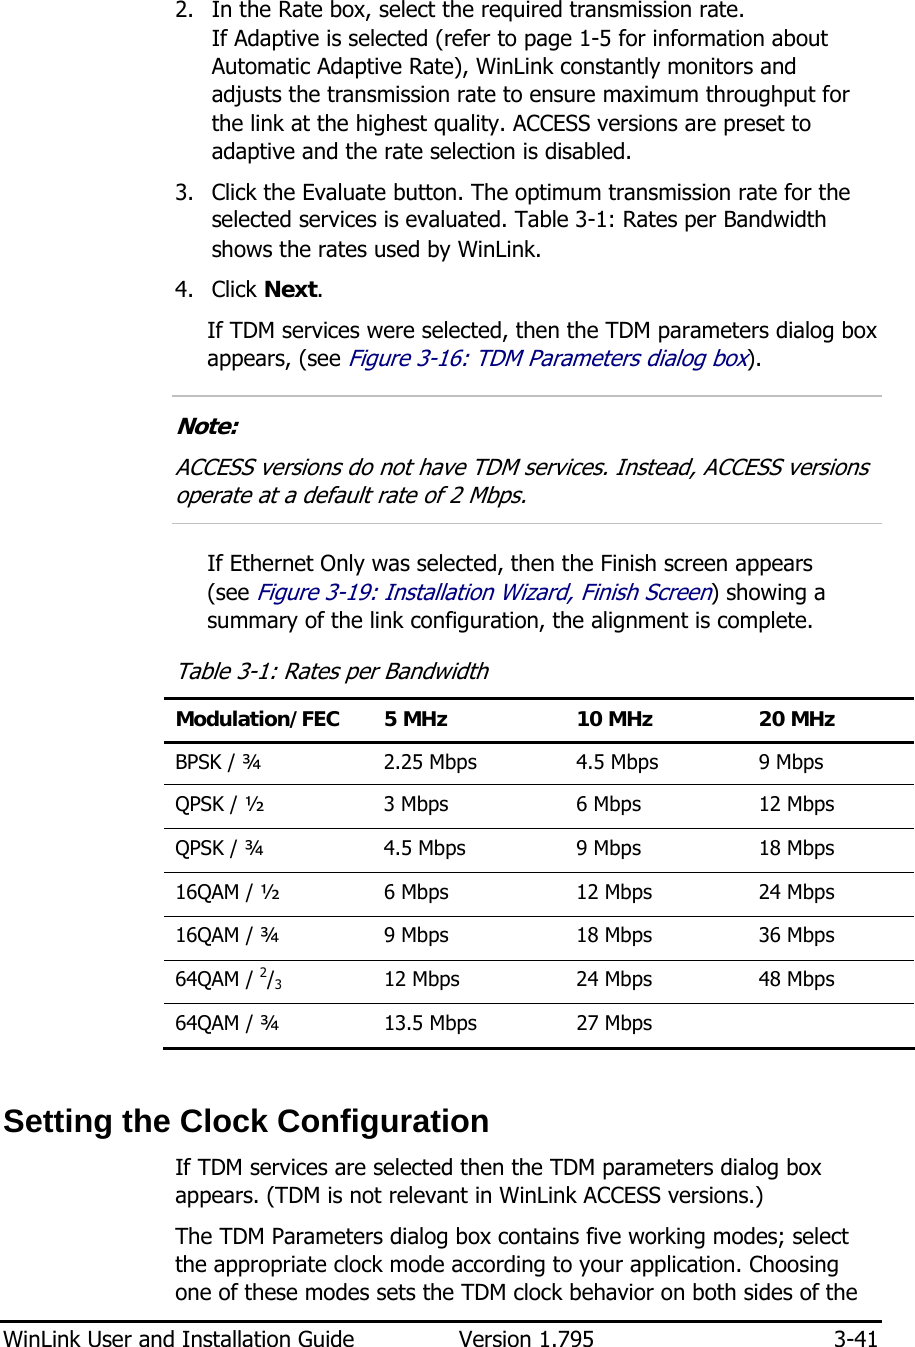  WinLink User and Installation Guide  Version 1.795  3-41  2. In the Rate box, select the required transmission rate. If Adaptive is selected (refer to page 1-5 for information about Automatic Adaptive Rate), WinLink constantly monitors and  adjusts the transmission rate to ensure maximum throughput for the link at the highest quality. ACCESS versions are preset to adaptive and the rate selection is disabled. 3. Click the Evaluate button. The optimum transmission rate for the selected services is evaluated. Table  3-1: Rates per Bandwidth shows the rates used by WinLink.  4. Click Next. If TDM services were selected, then the TDM parameters dialog box appears, (see Figure  3-16: TDM Parameters dialog box).  Note: ACCESS versions do not have TDM services. Instead, ACCESS versions operate at a default rate of 2 Mbps.  If Ethernet Only was selected, then the Finish screen appears  (see Figure  3-19: Installation Wizard, Finish Screen) showing a summary of the link configuration, the alignment is complete. Table  3-1: Rates per Bandwidth Modulation/FEC  5 MHz  10 MHz  20 MHz BPSK / ¾  2.25 Mbps  4.5 Mbps  9 Mbps QPSK / ½   3 Mbps  6 Mbps  12 Mbps QPSK / ¾   4.5 Mbps  9 Mbps  18 Mbps 16QAM / ½   6 Mbps  12 Mbps  24 Mbps 16QAM / ¾   9 Mbps  18 Mbps  36 Mbps 64QAM / 2/3   12 Mbps  24 Mbps  48 Mbps 64QAM / ¾   13.5 Mbps  27 Mbps    Setting the Clock Configuration If TDM services are selected then the TDM parameters dialog box appears. (TDM is not relevant in WinLink ACCESS versions.) The TDM Parameters dialog box contains five working modes; select the appropriate clock mode according to your application. Choosing one of these modes sets the TDM clock behavior on both sides of the 